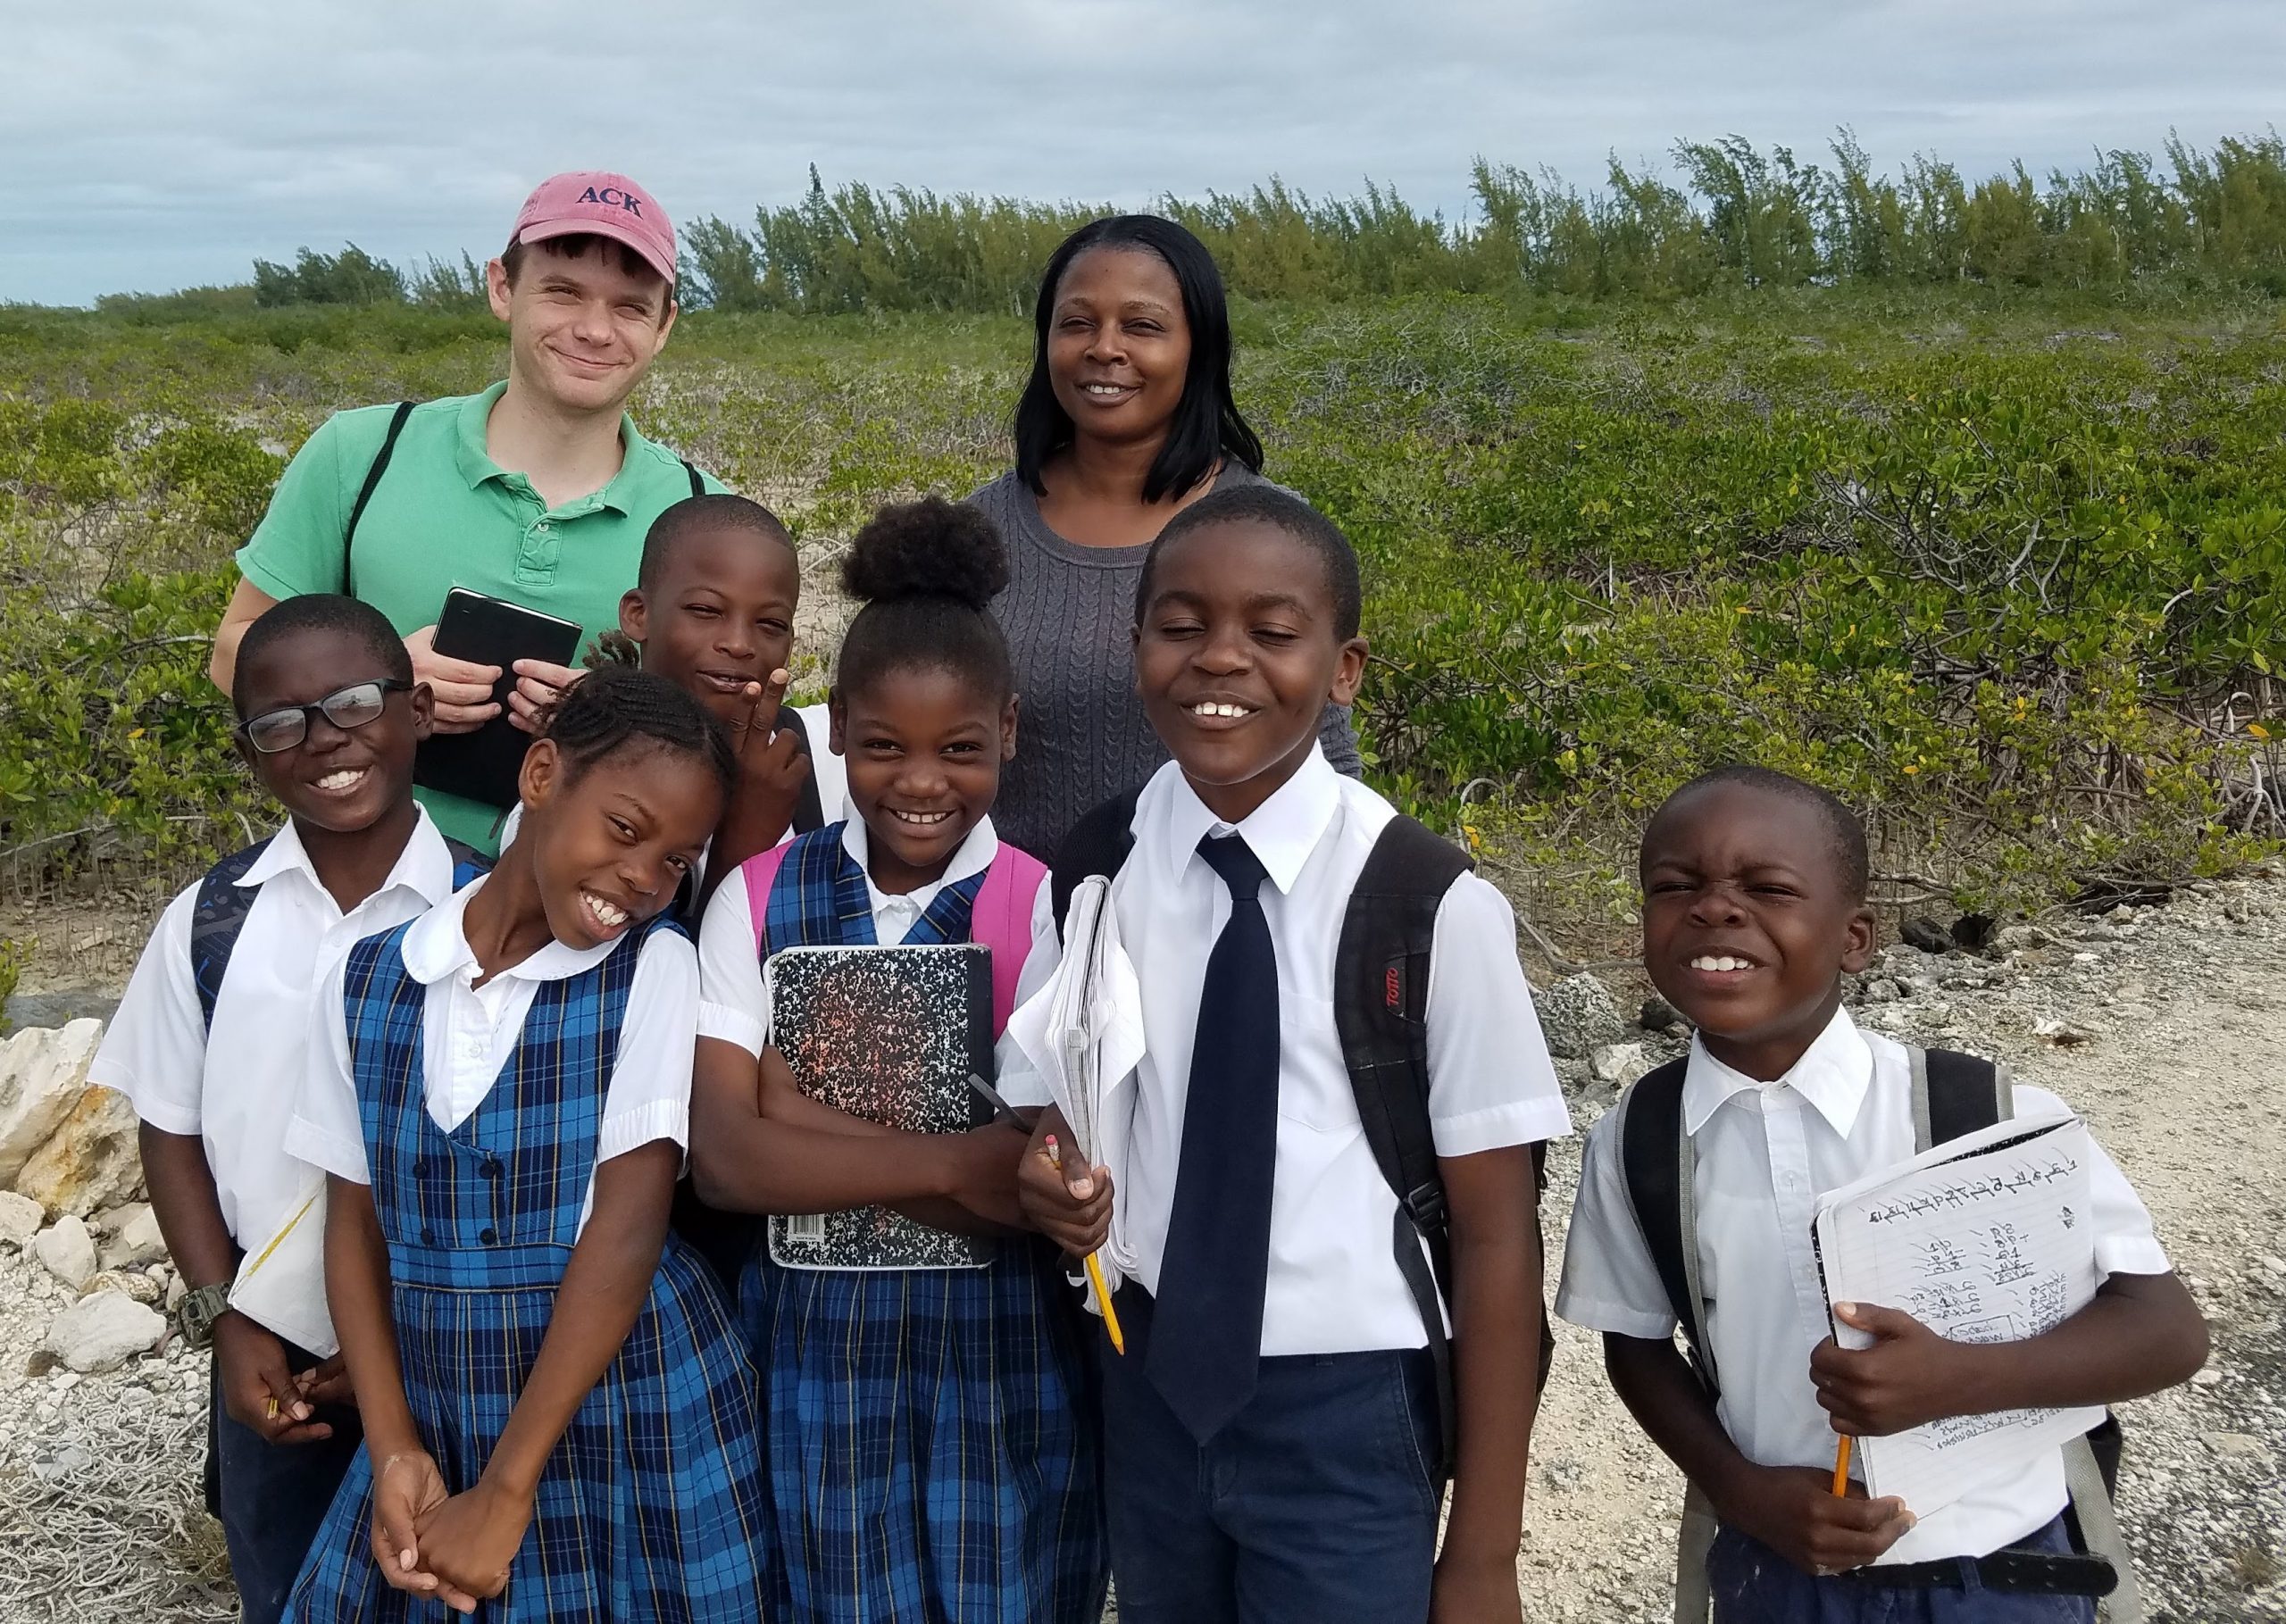 James Austin, a student in Merry Lea’s MAEE program, with a Bahamian teacher and her students.